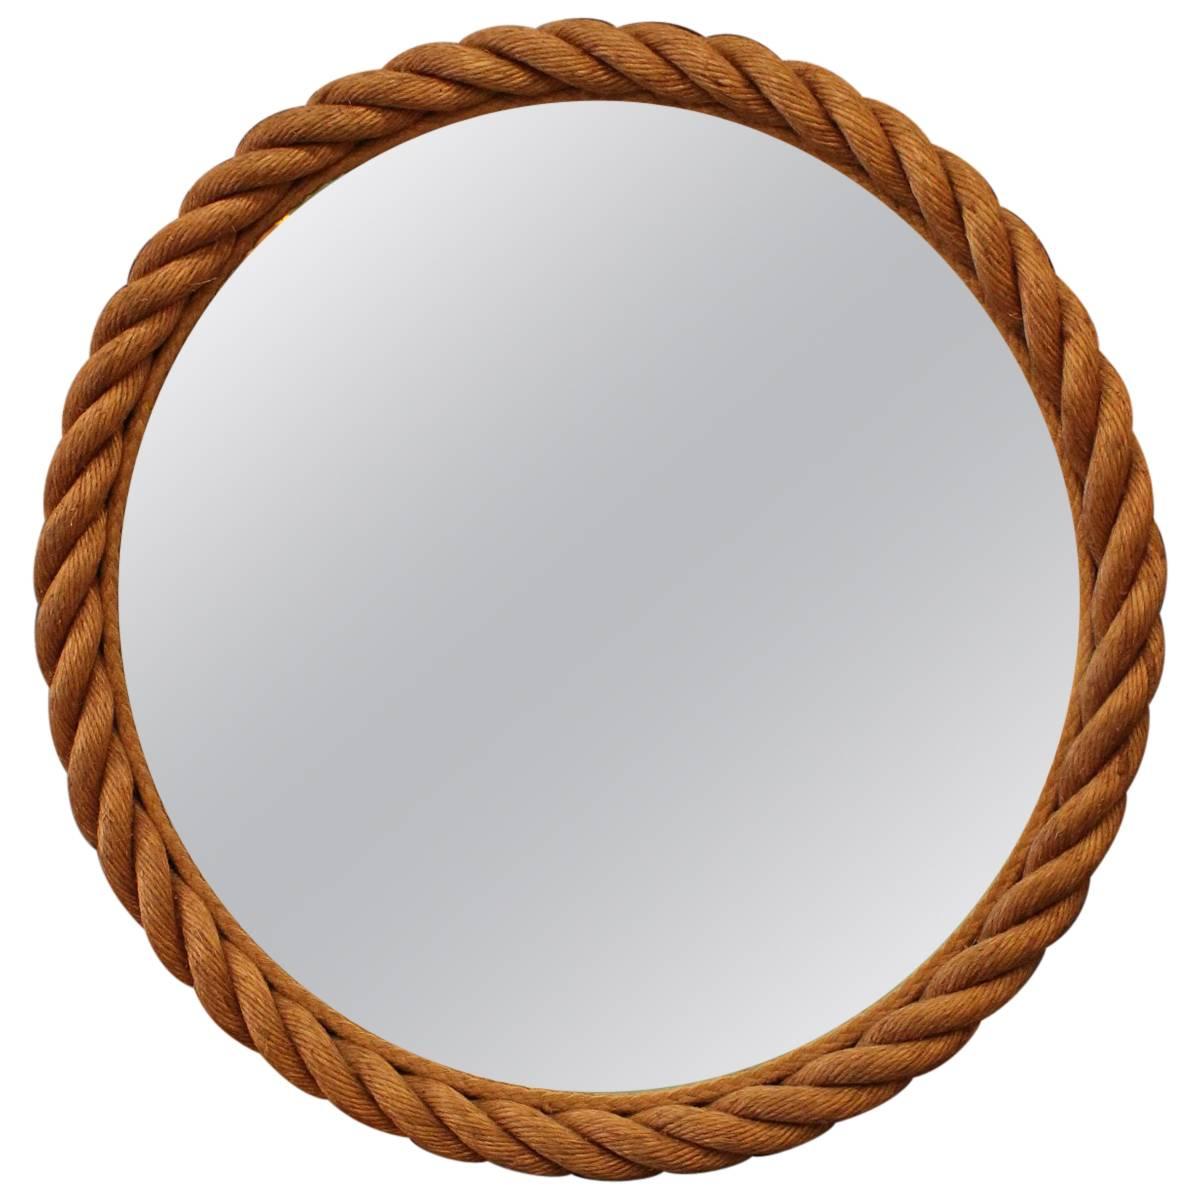 Beautiful Audoux and Minet Rope Rond Mirror, circa 1960